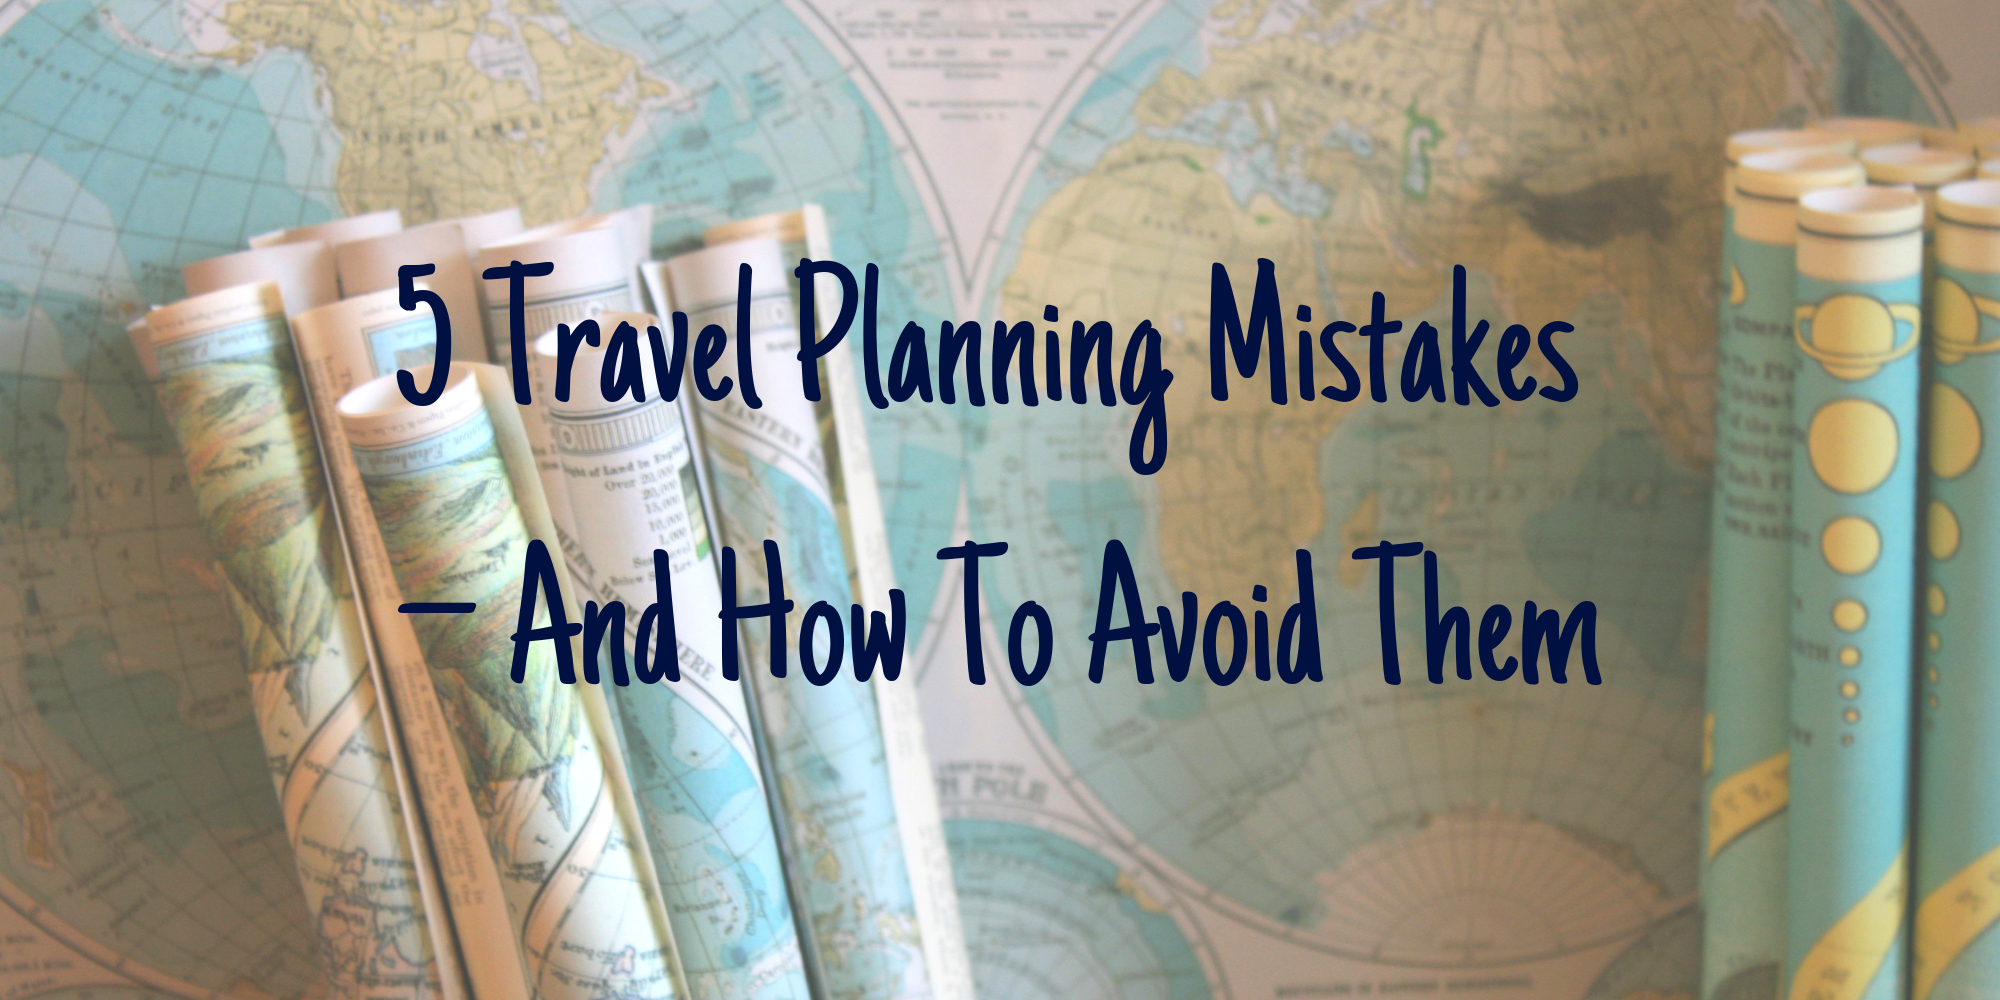 5 Travel Planning Mistakes And How To Avoid Them